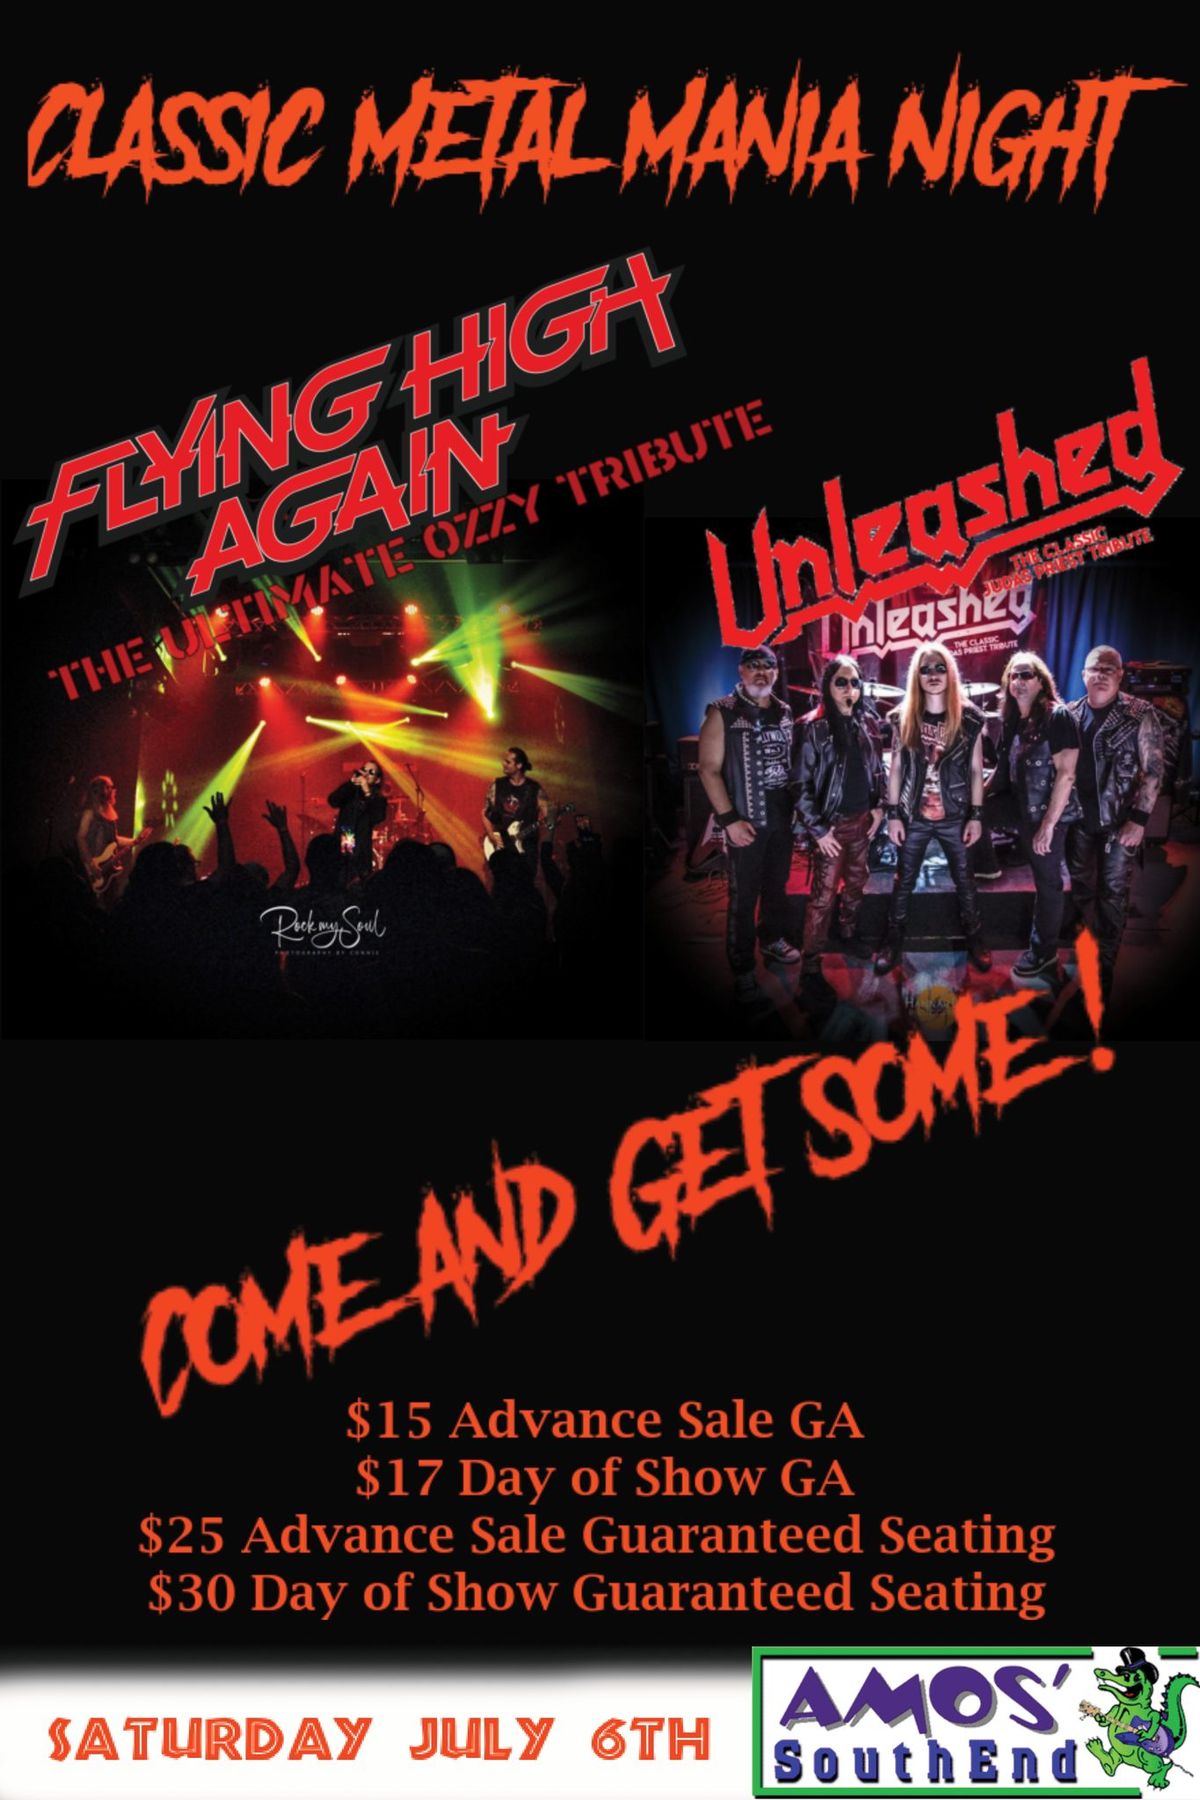 Flying High Again The Ultimate Ozzy tribute with Unleased a Classic Judas Priest Tribute